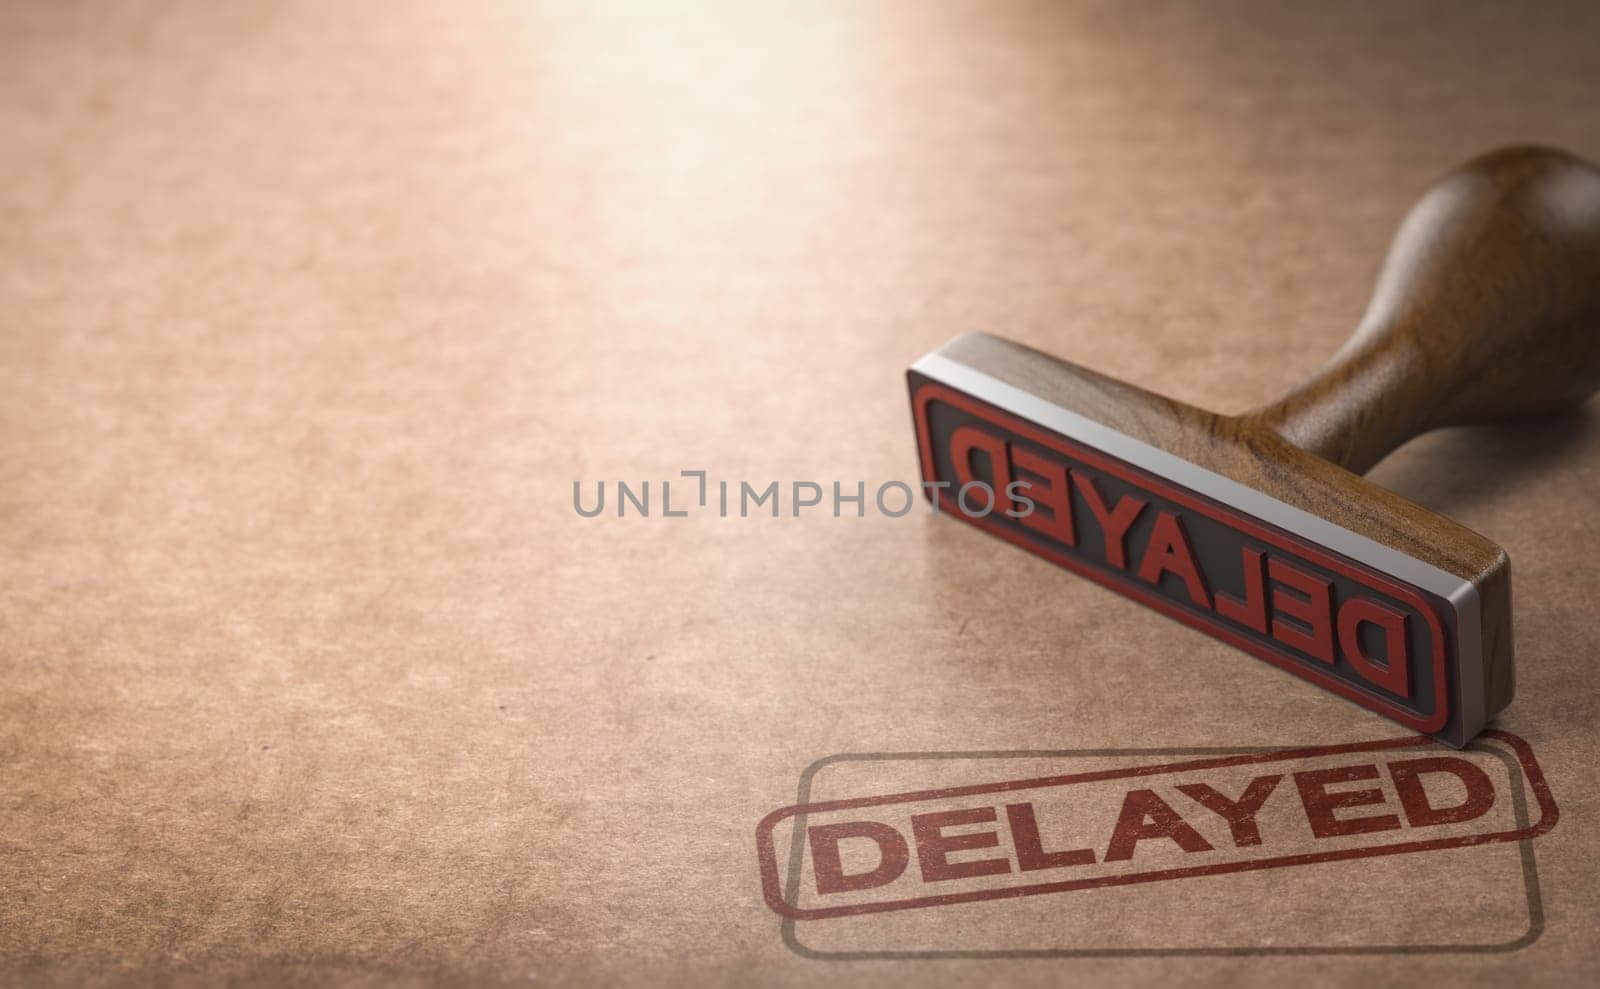 Delay concept by Olivier-Le-Moal